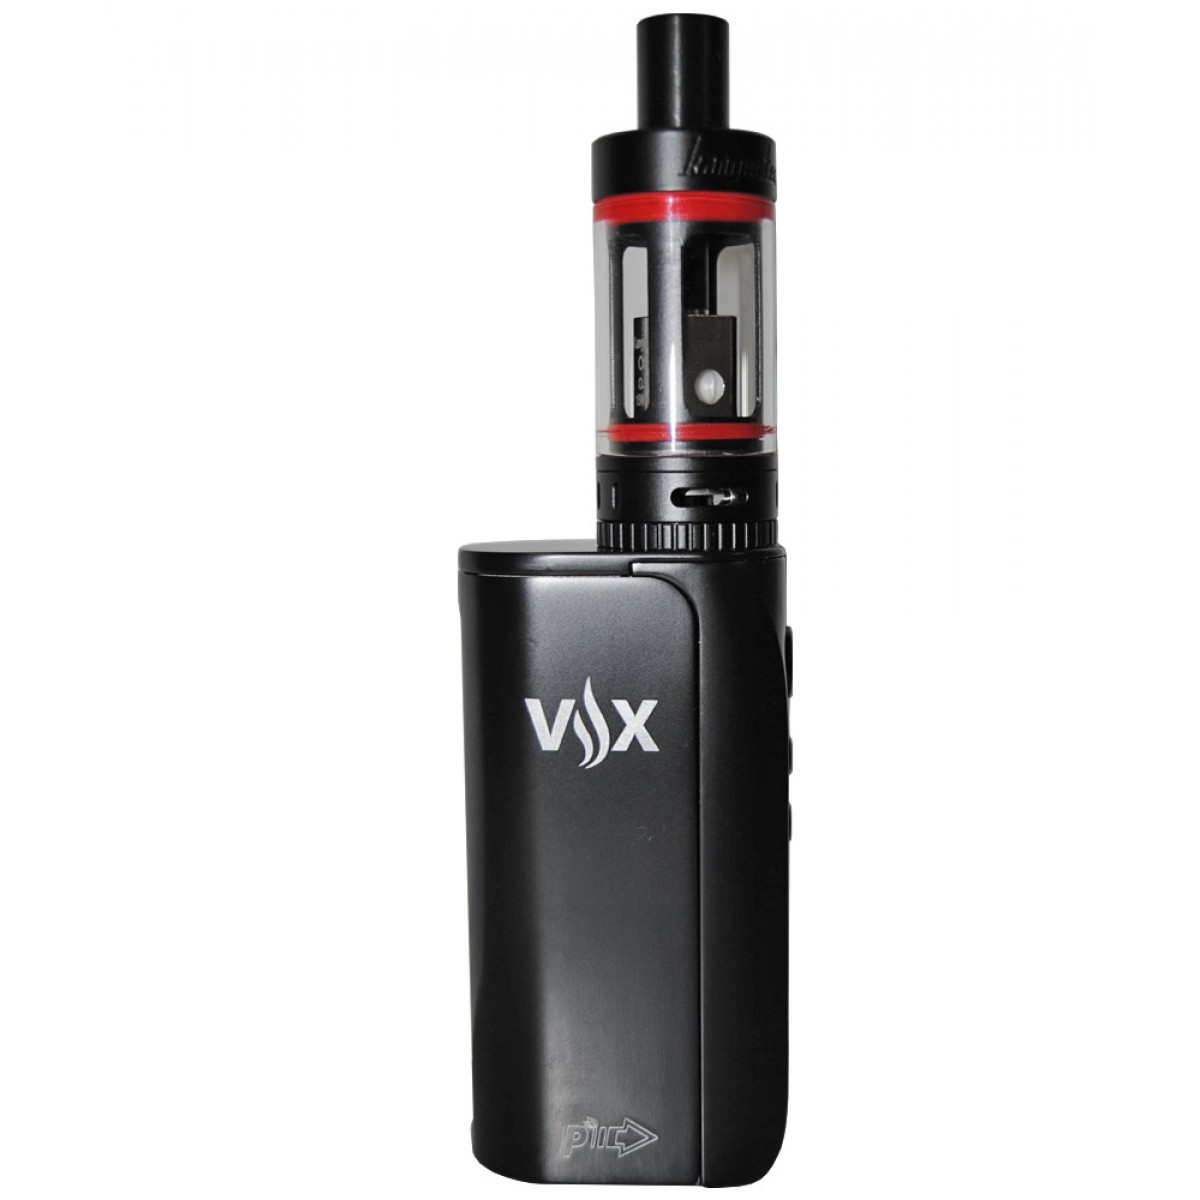 Are You Using The Best Vape Ideas? 4